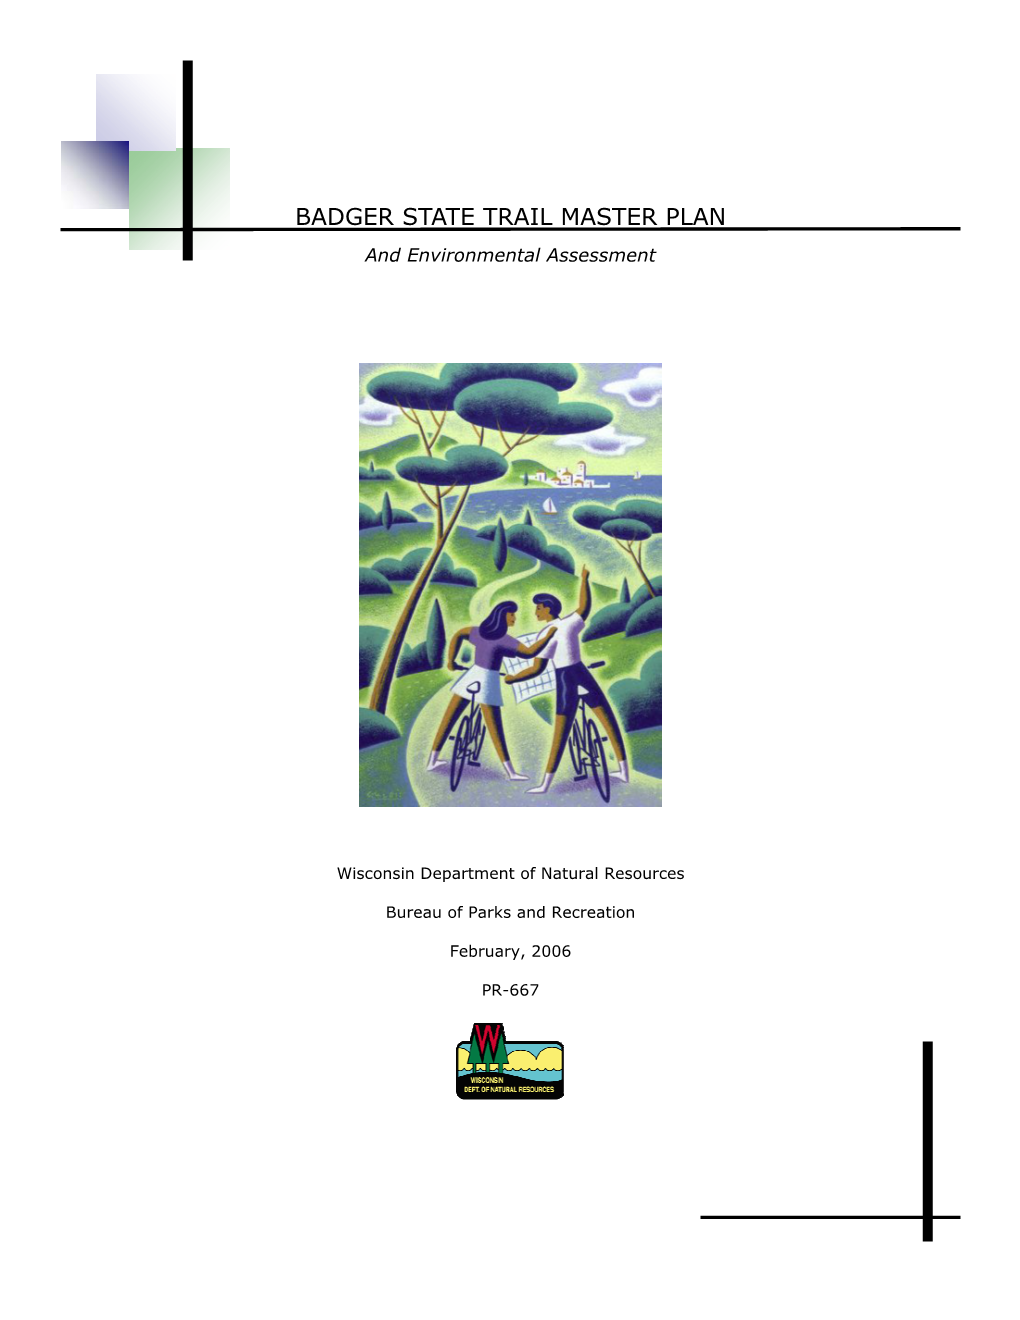 BADGER STATE TRAIL MASTER PLAN and Environmental Assessment